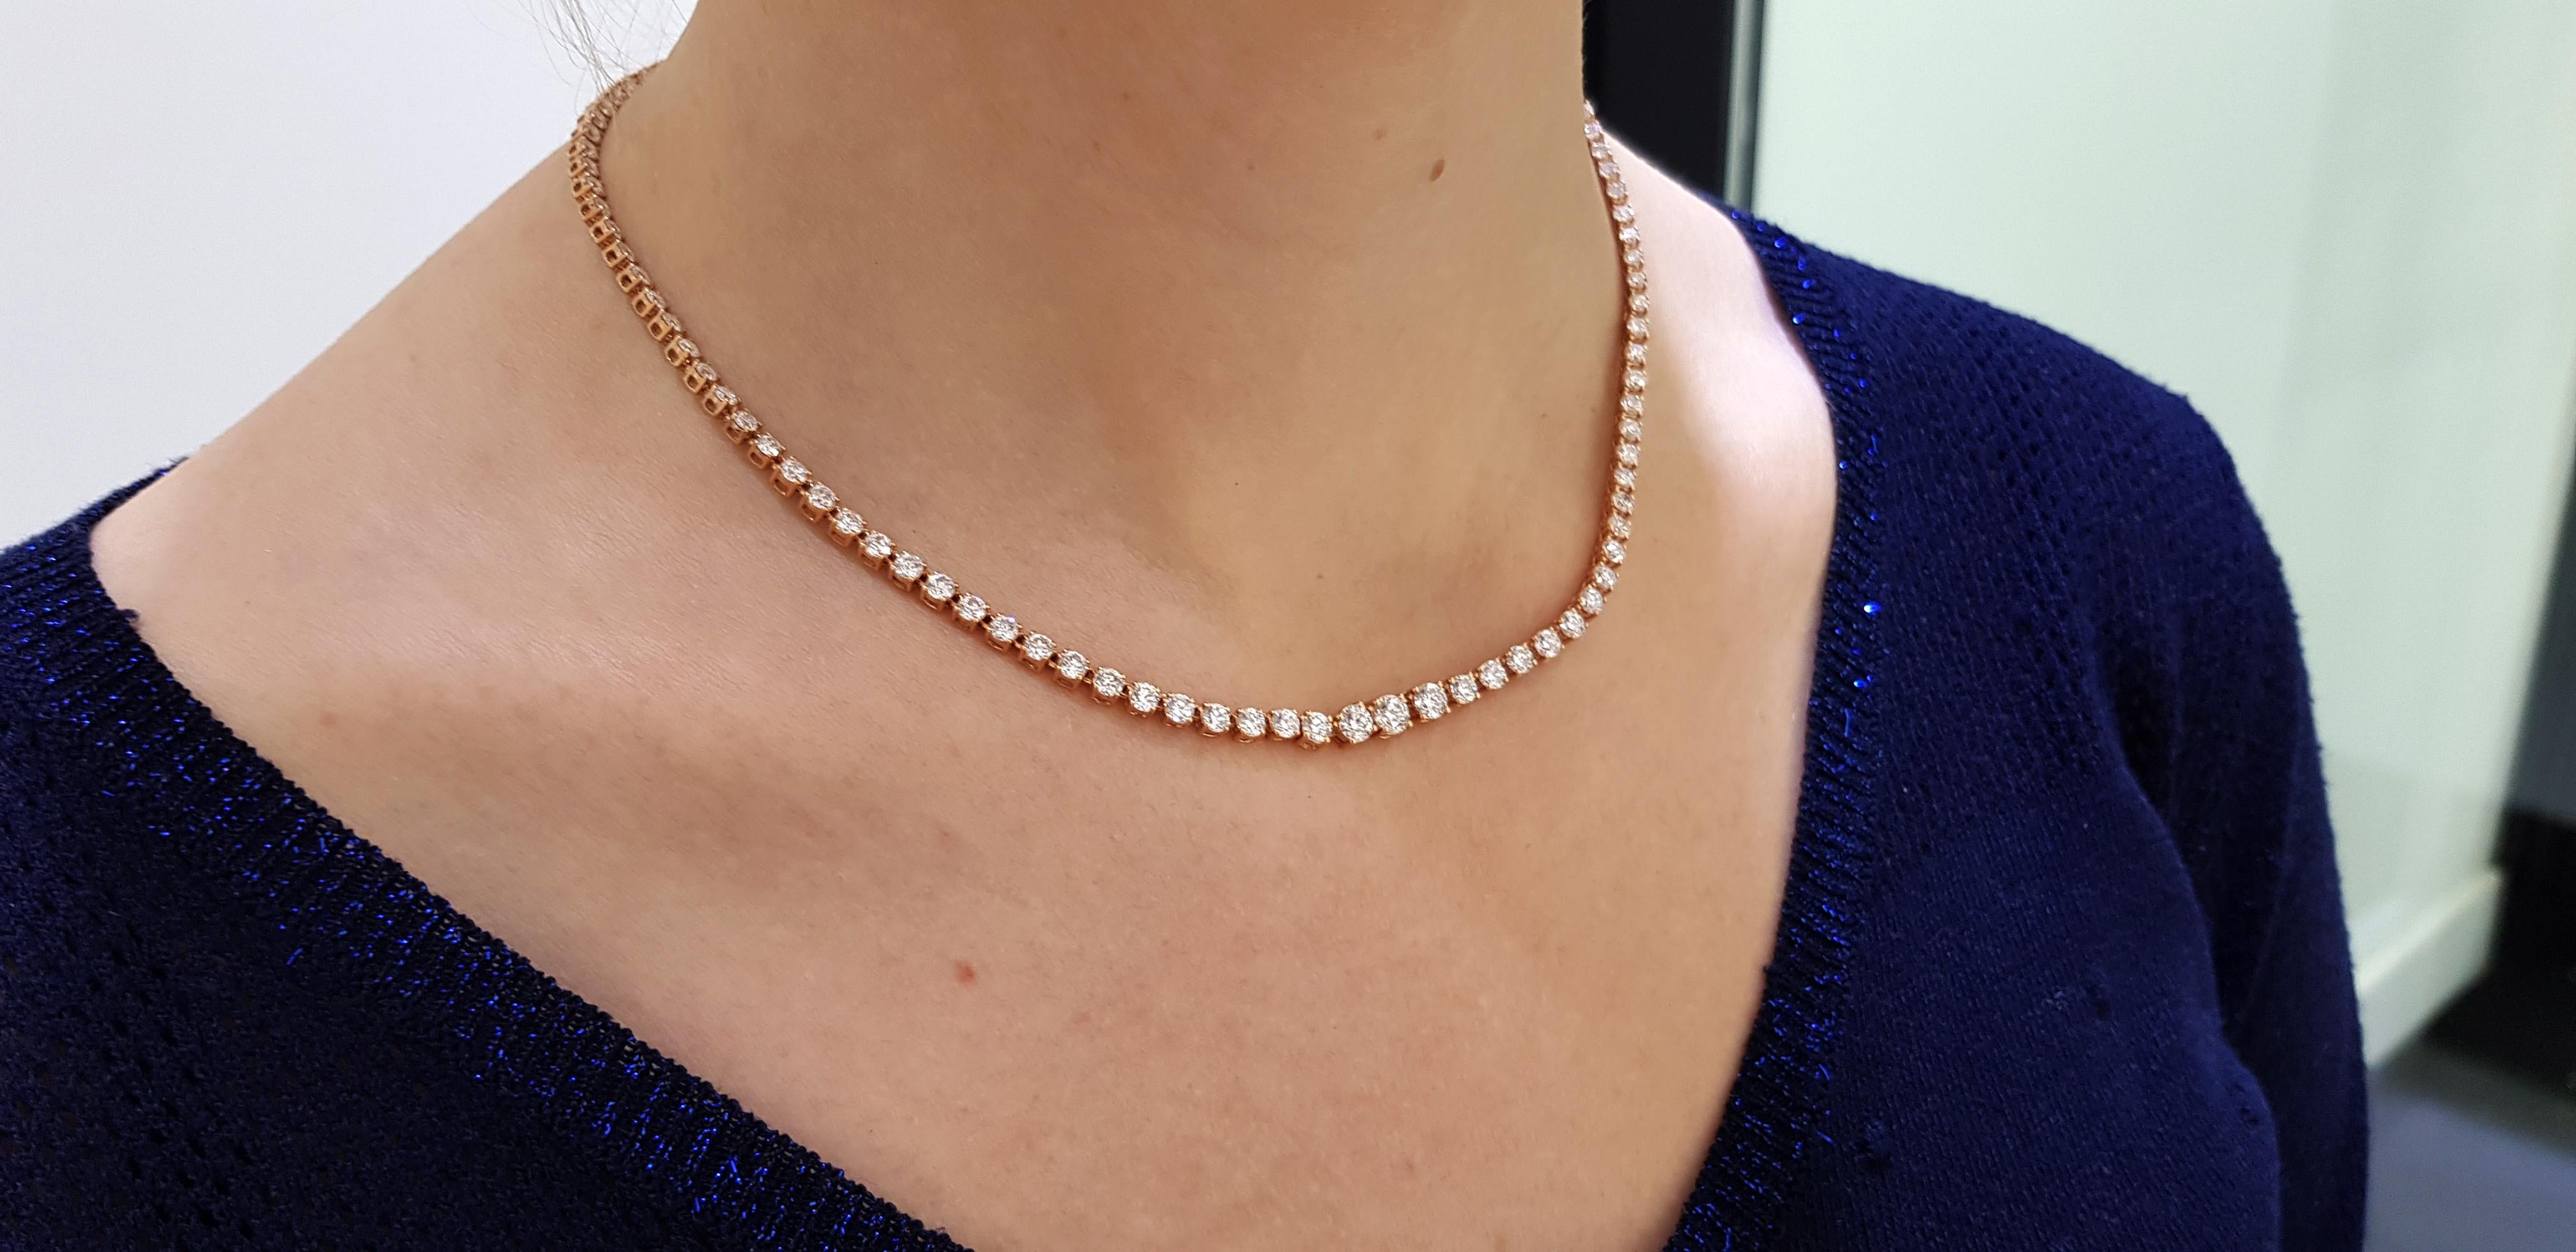 This stunning and impressive Riviera Necklace features substantial Diamond weight of 10.00 Carats in beautifully graduated Round Brilliant Cut gems with a sparkly white color G/H clarity SI1. Each stone has a four claw setting with open gallery and